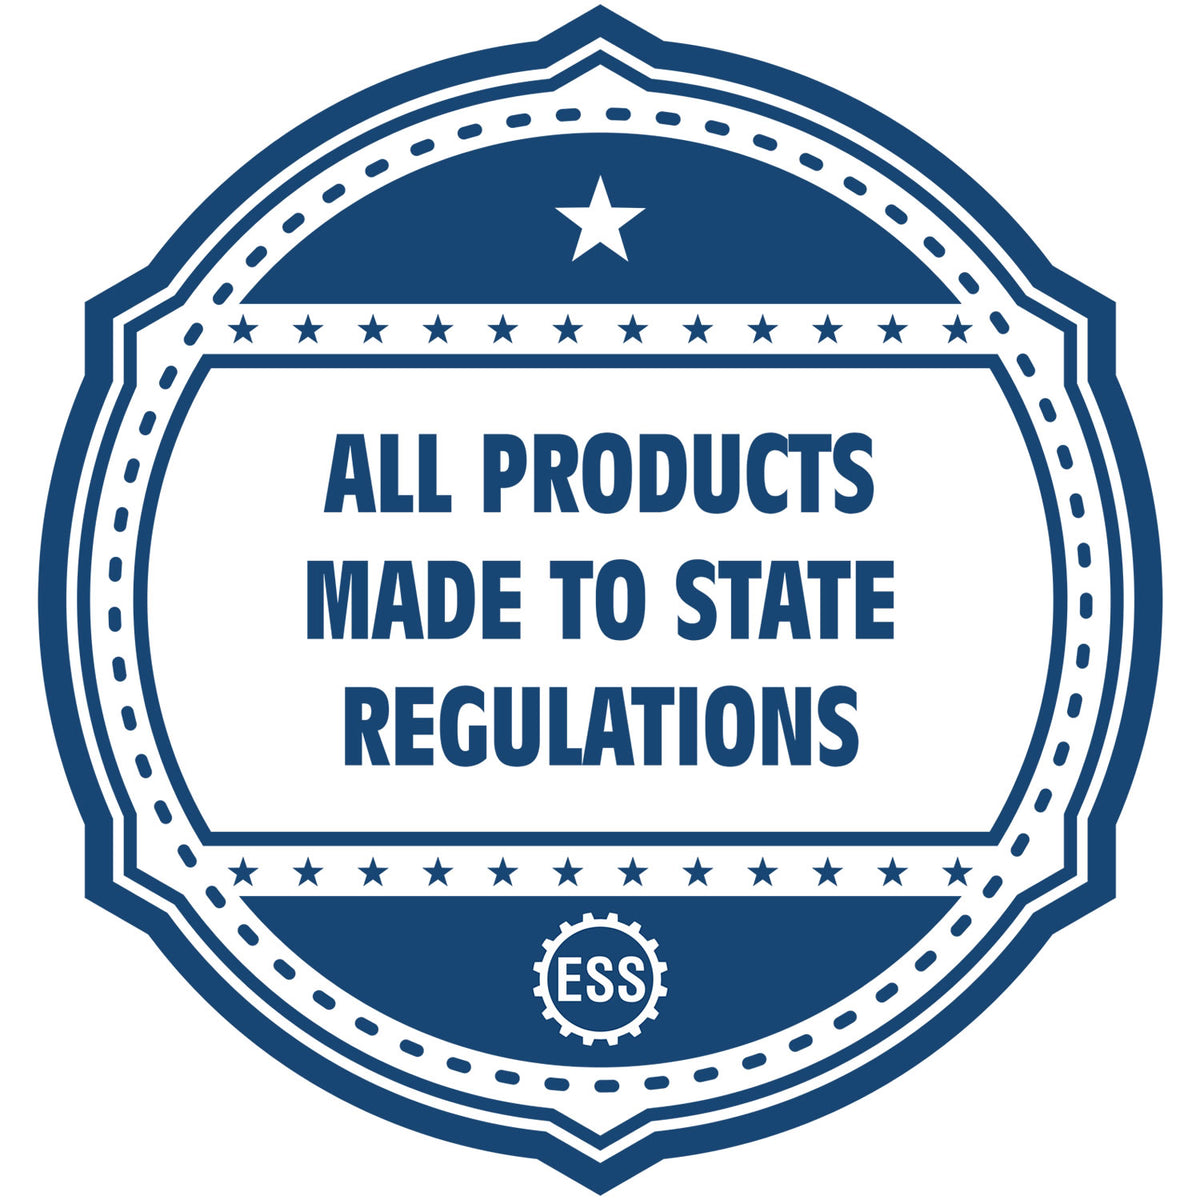 An icon or badge element for the Slim Pre-Inked New Mexico Landscape Architect Seal Stamp showing that this product is made in compliance with state regulations.